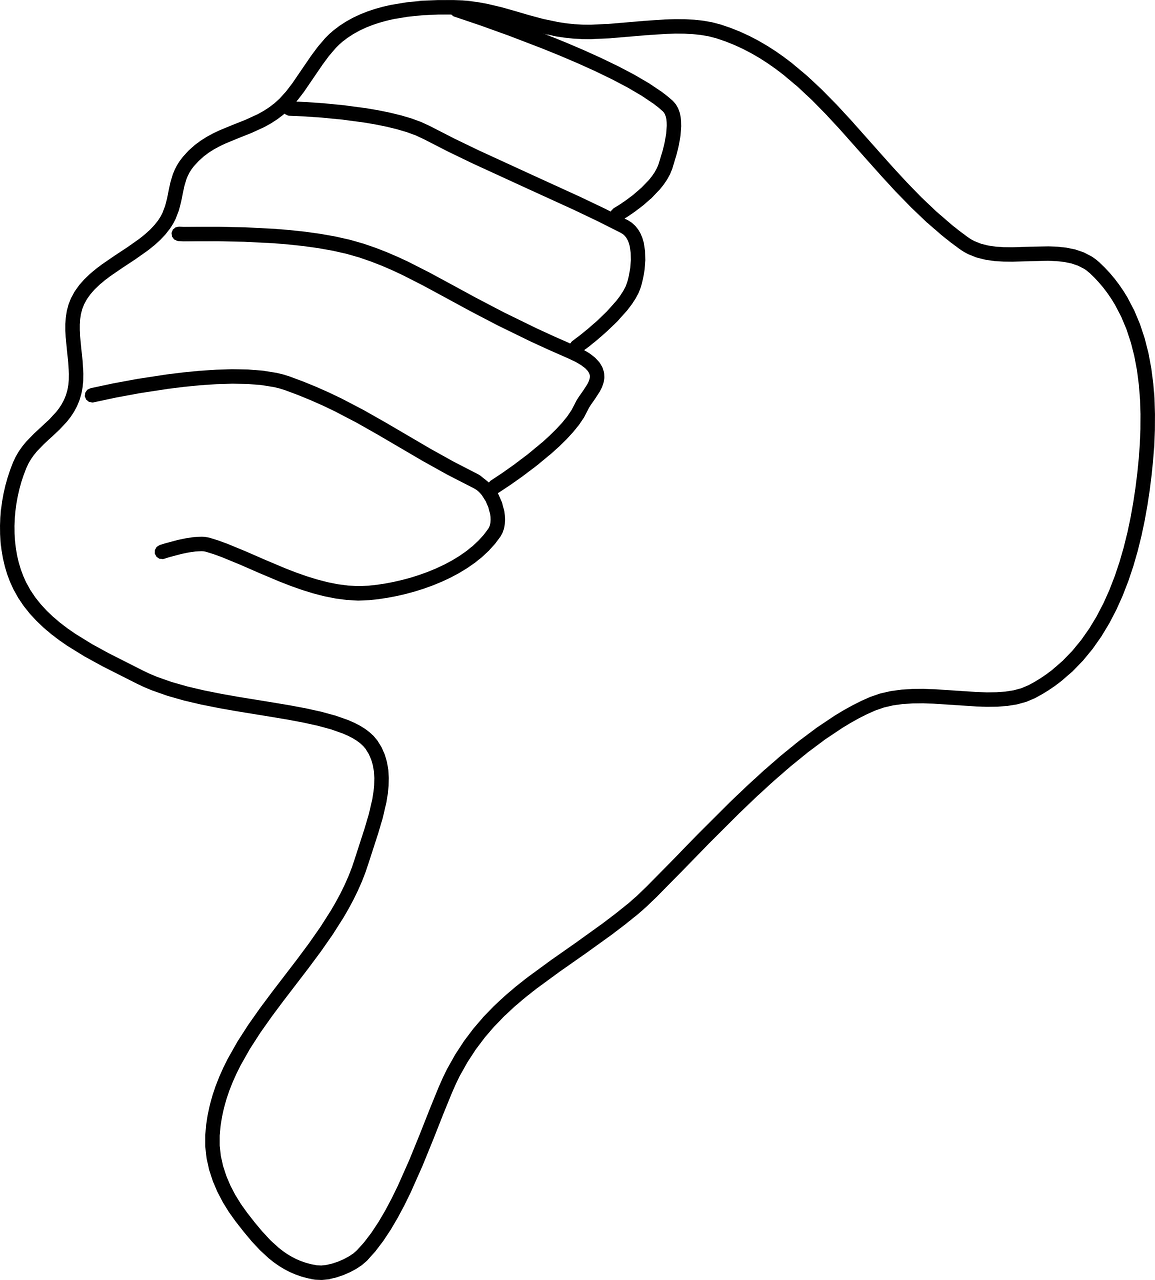 A White Hand With A Thumb Down